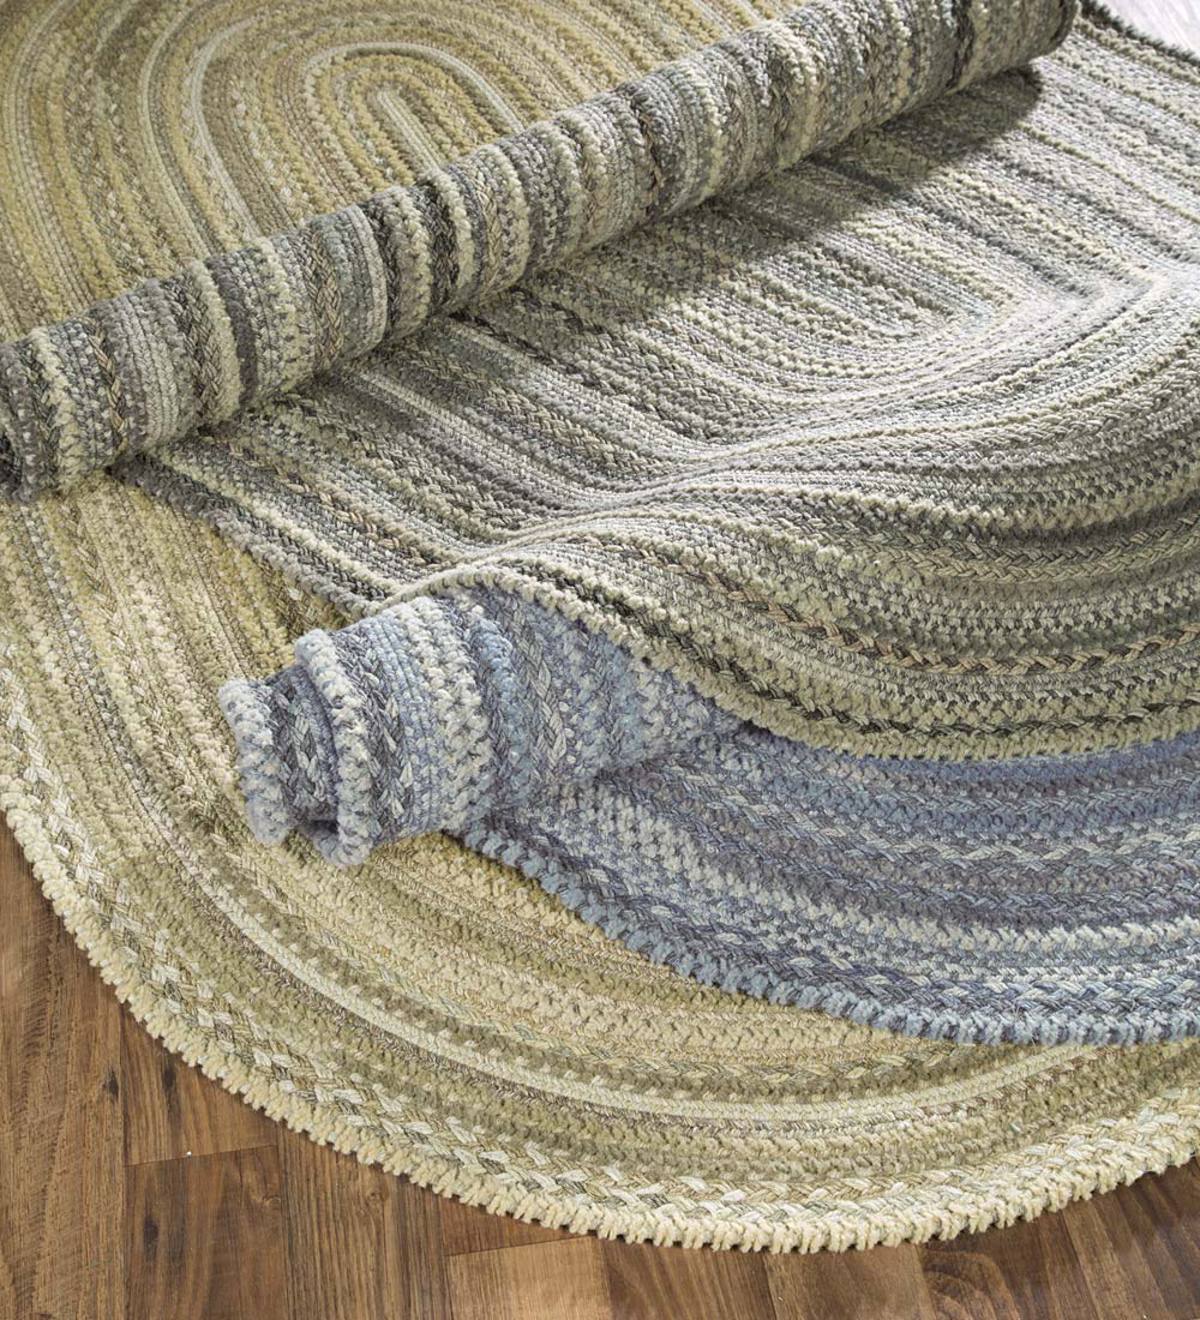 Oval Riverview Wool Blend Braided Rug